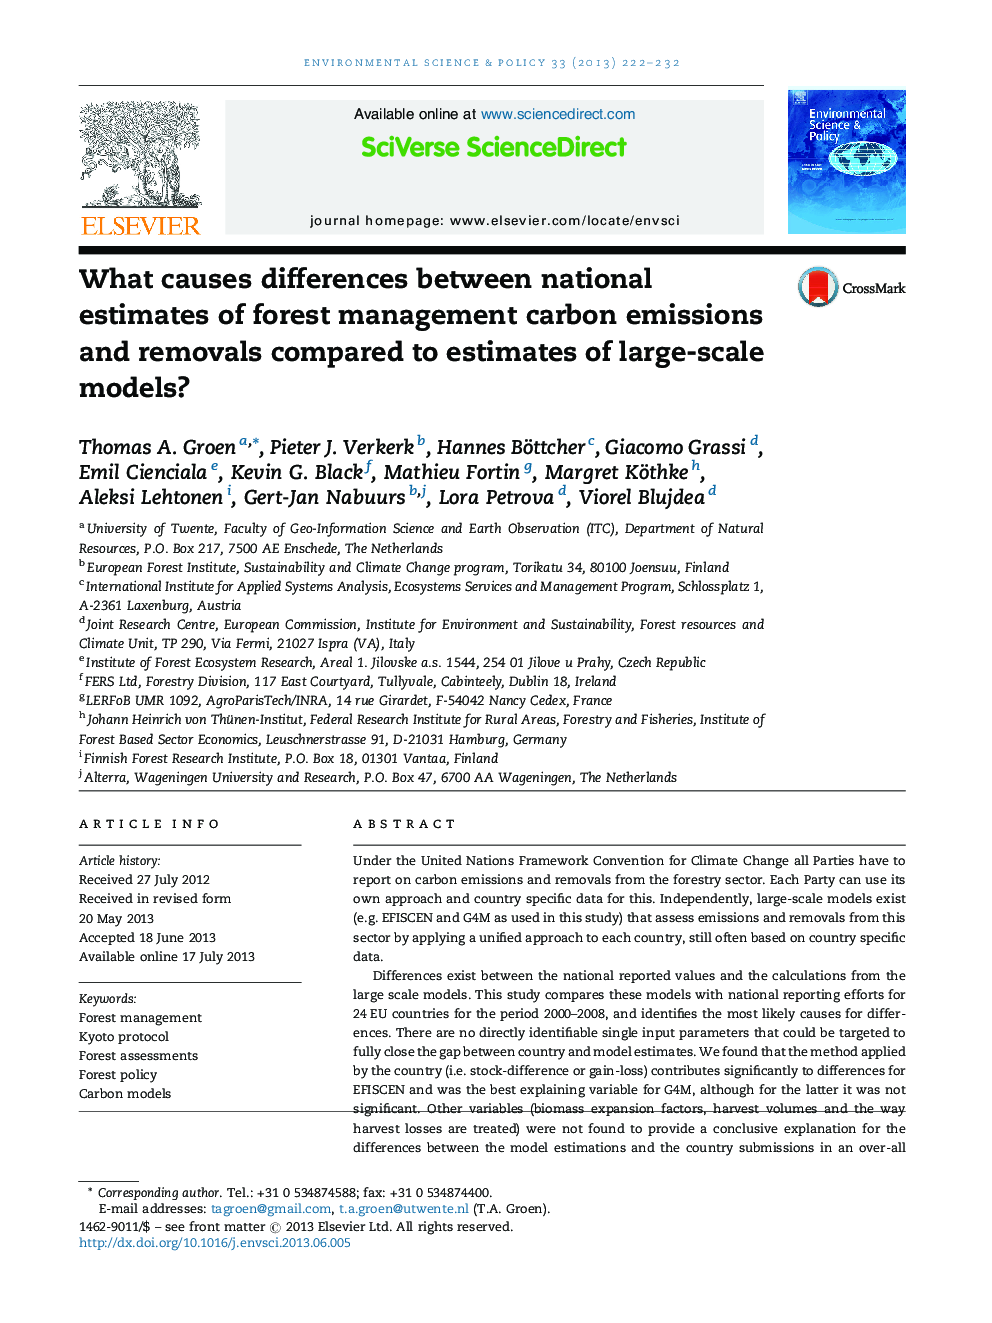 What causes differences between national estimates of forest management carbon emissions and removals compared to estimates of large-scale models?